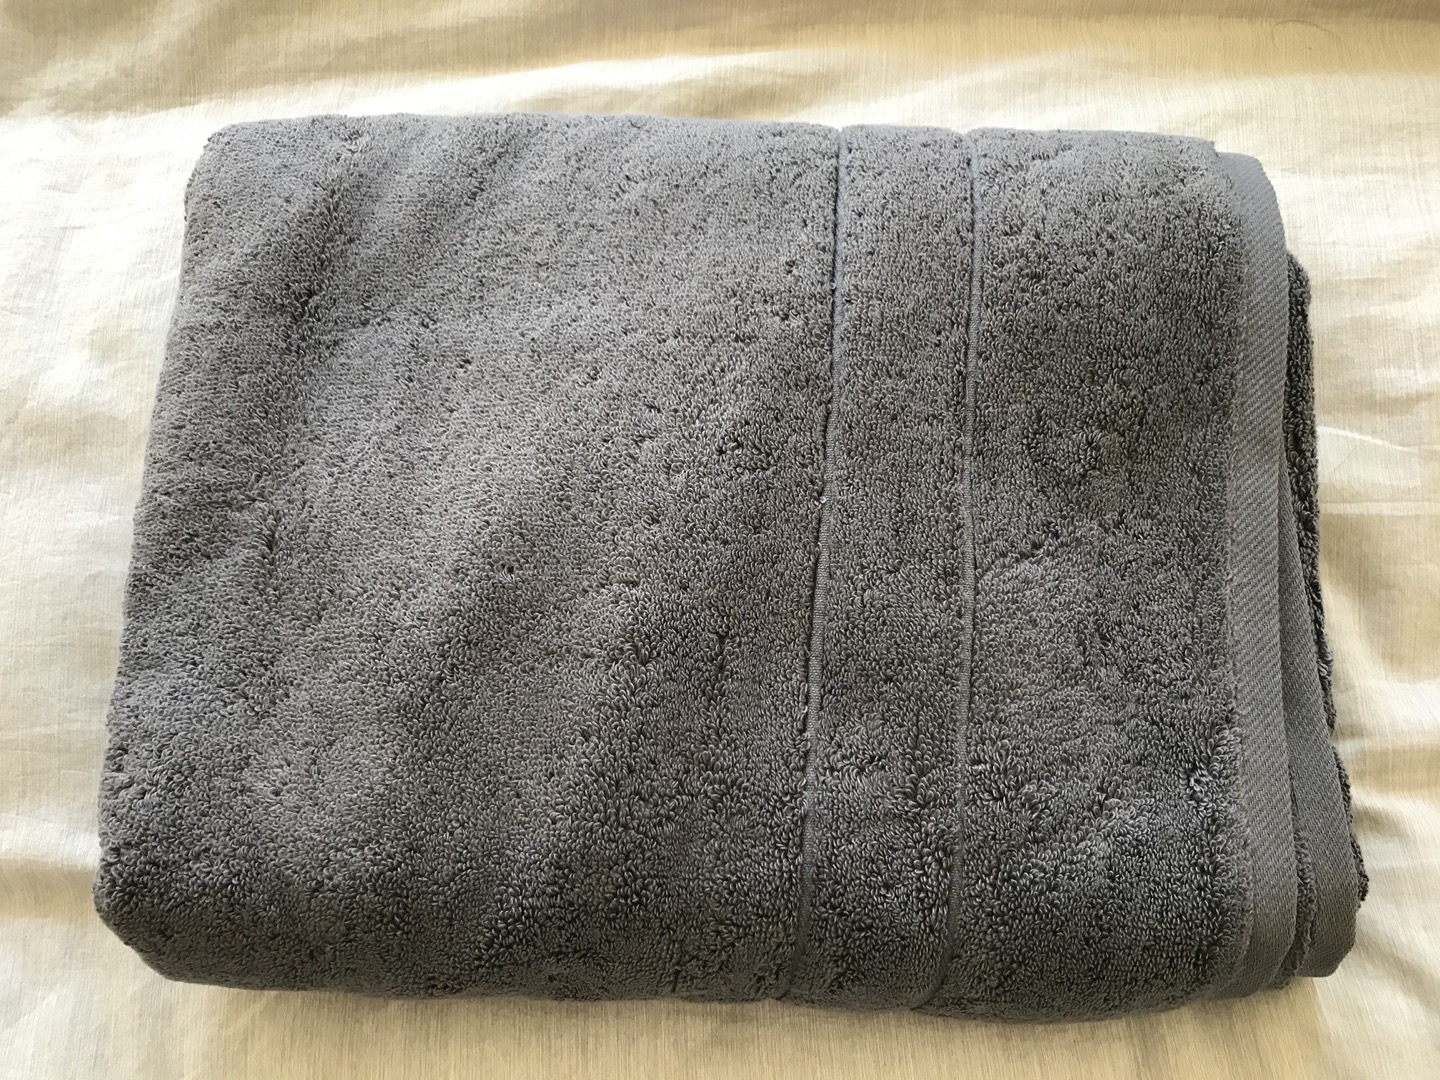 Towel on bed